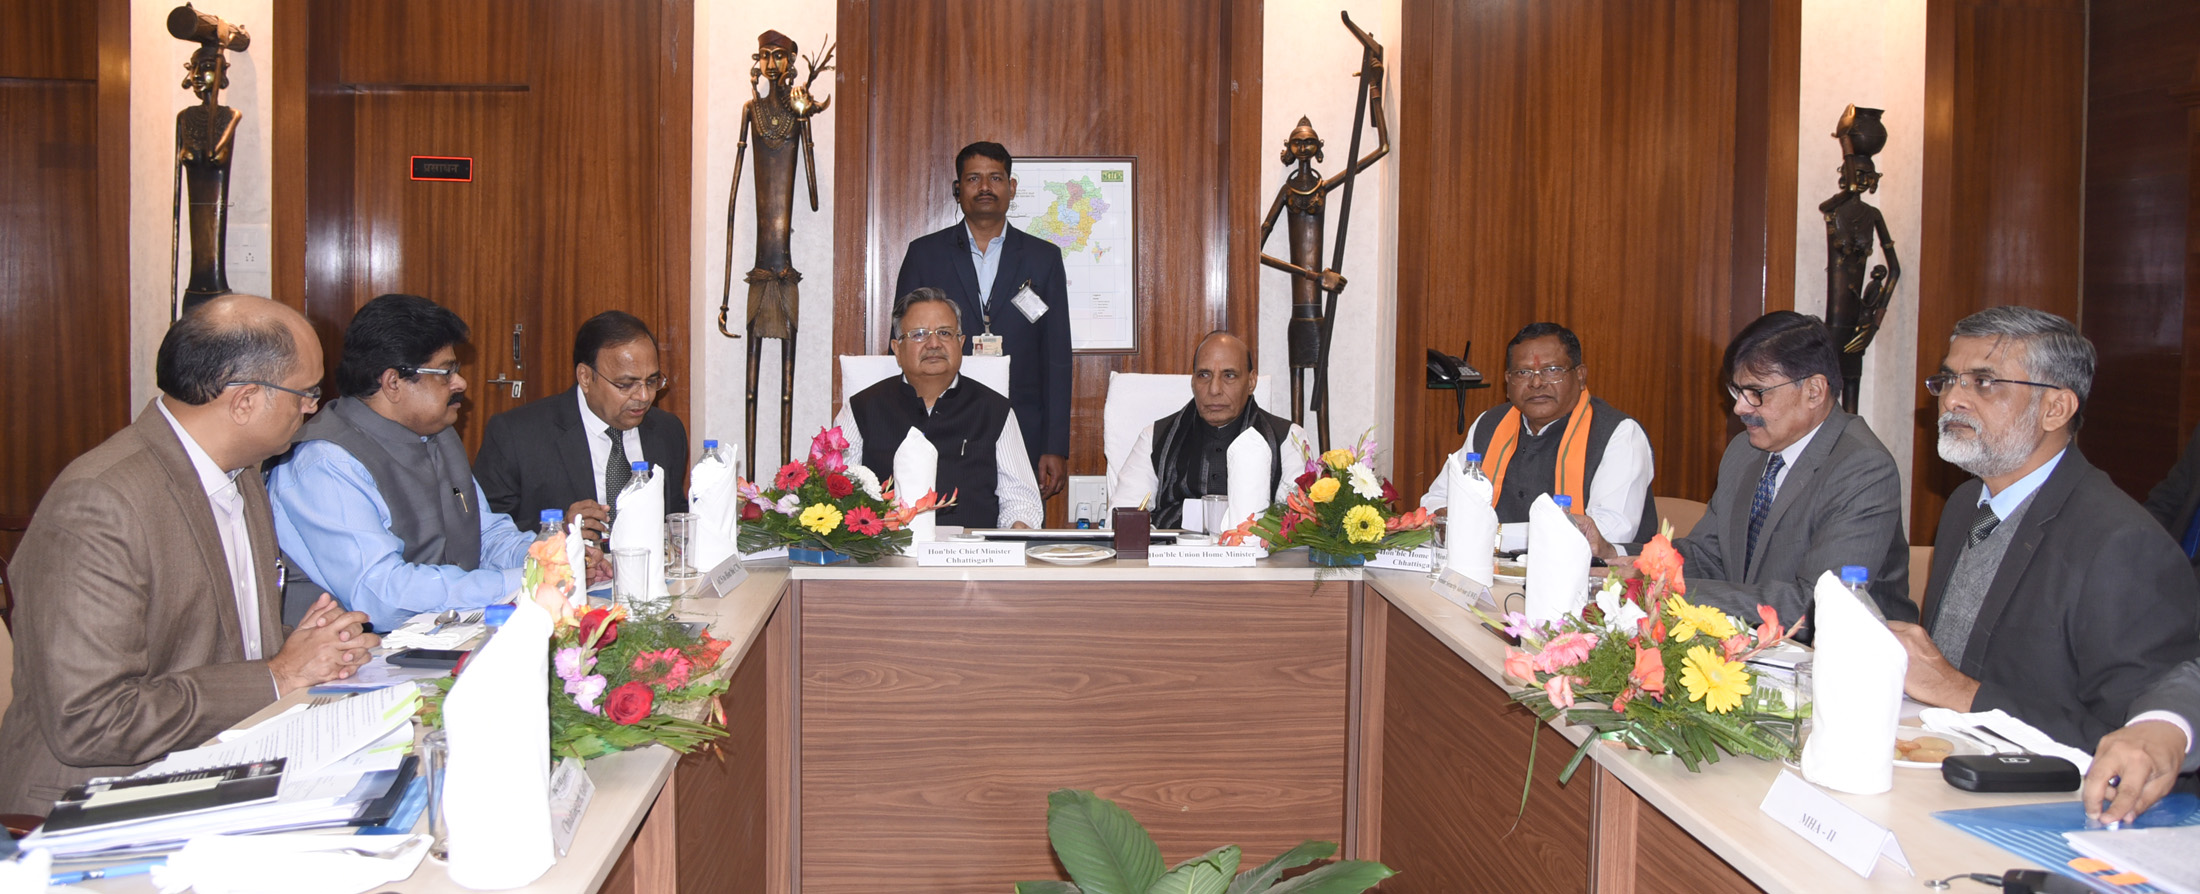 The Union Home Minister, Shri Rajnath Singh reviewing the LWE situation in Chhattisgarh state at a meeting with the Chief Minister of Chhattisgarh, Dr. Raman Singh and Senior Officials, in Raipur on January 16, 2017.  The Minister of Home, Jail and Public Health Engineering Department of Chhattisgarh, Shri Ramsewak Paikra and the Senior Security Adviser in the Union Home Ministry, Shri K. Vijay Kumar, are also seen.